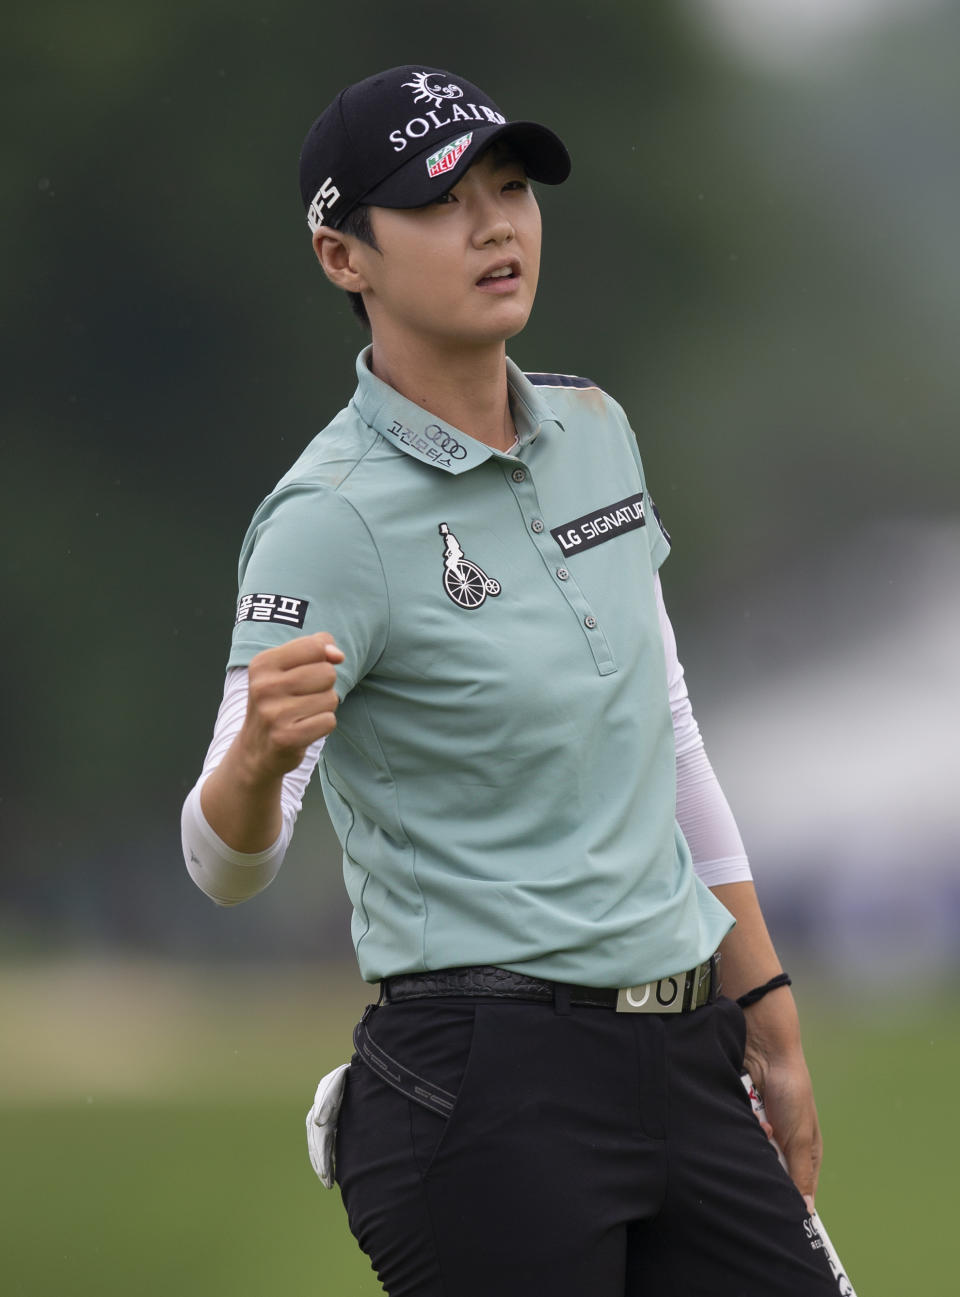 Sung Hyun Park, of South Korea, pumps her fist after sinking a birdie on the 18th hole during the final round of the KPMG Women's PGA Championship golf tournament, Sunday, June 23, 2019, in Chaska, Minn. (AP Photo/Andy Clayton-King)